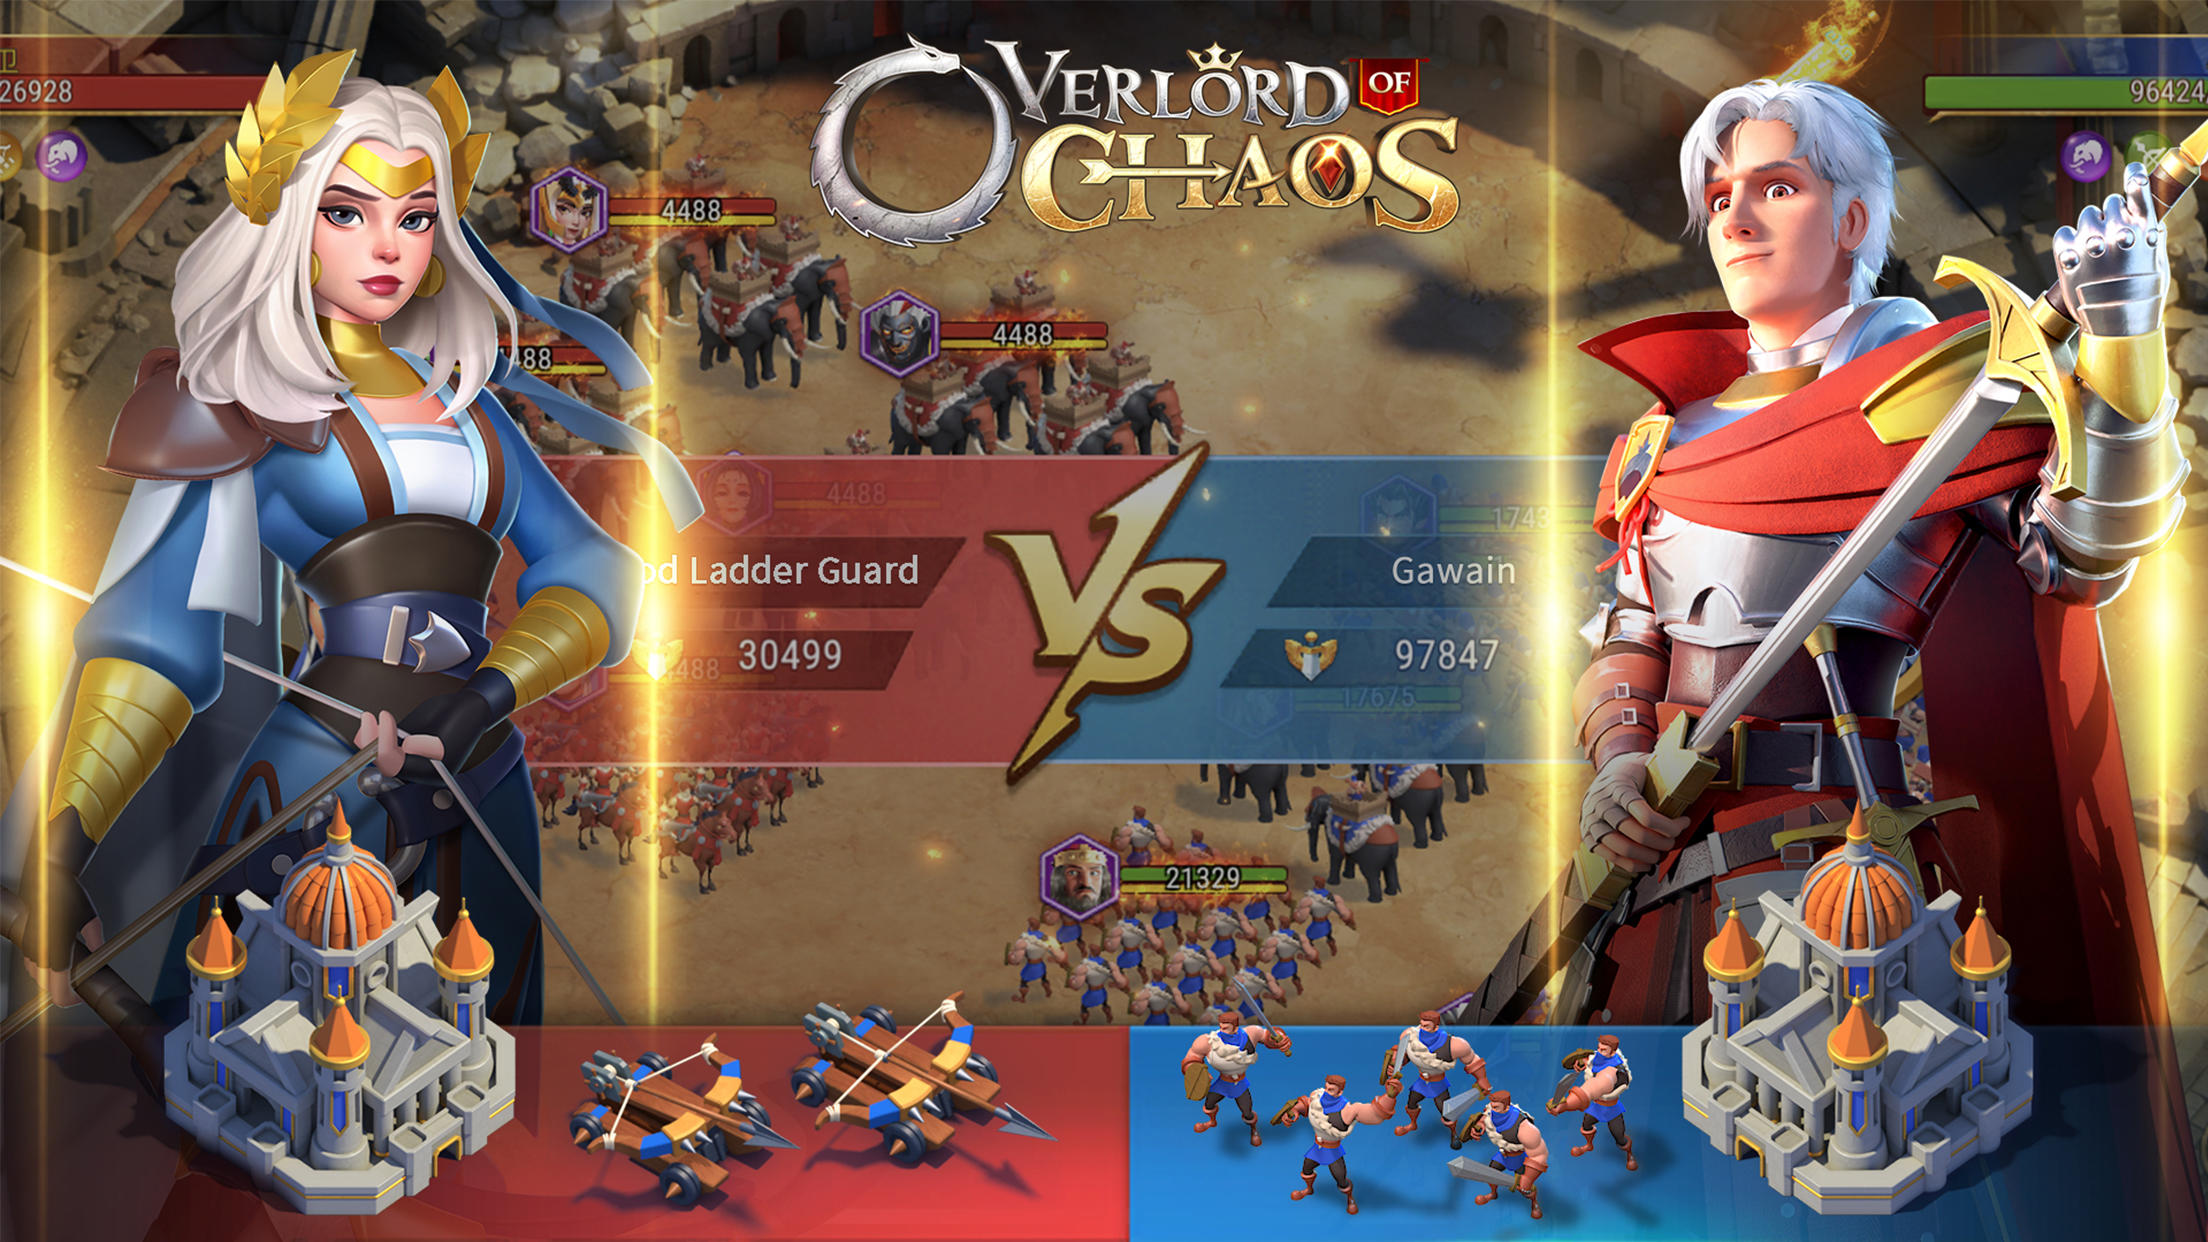 Overlord of Chaos screenshot game